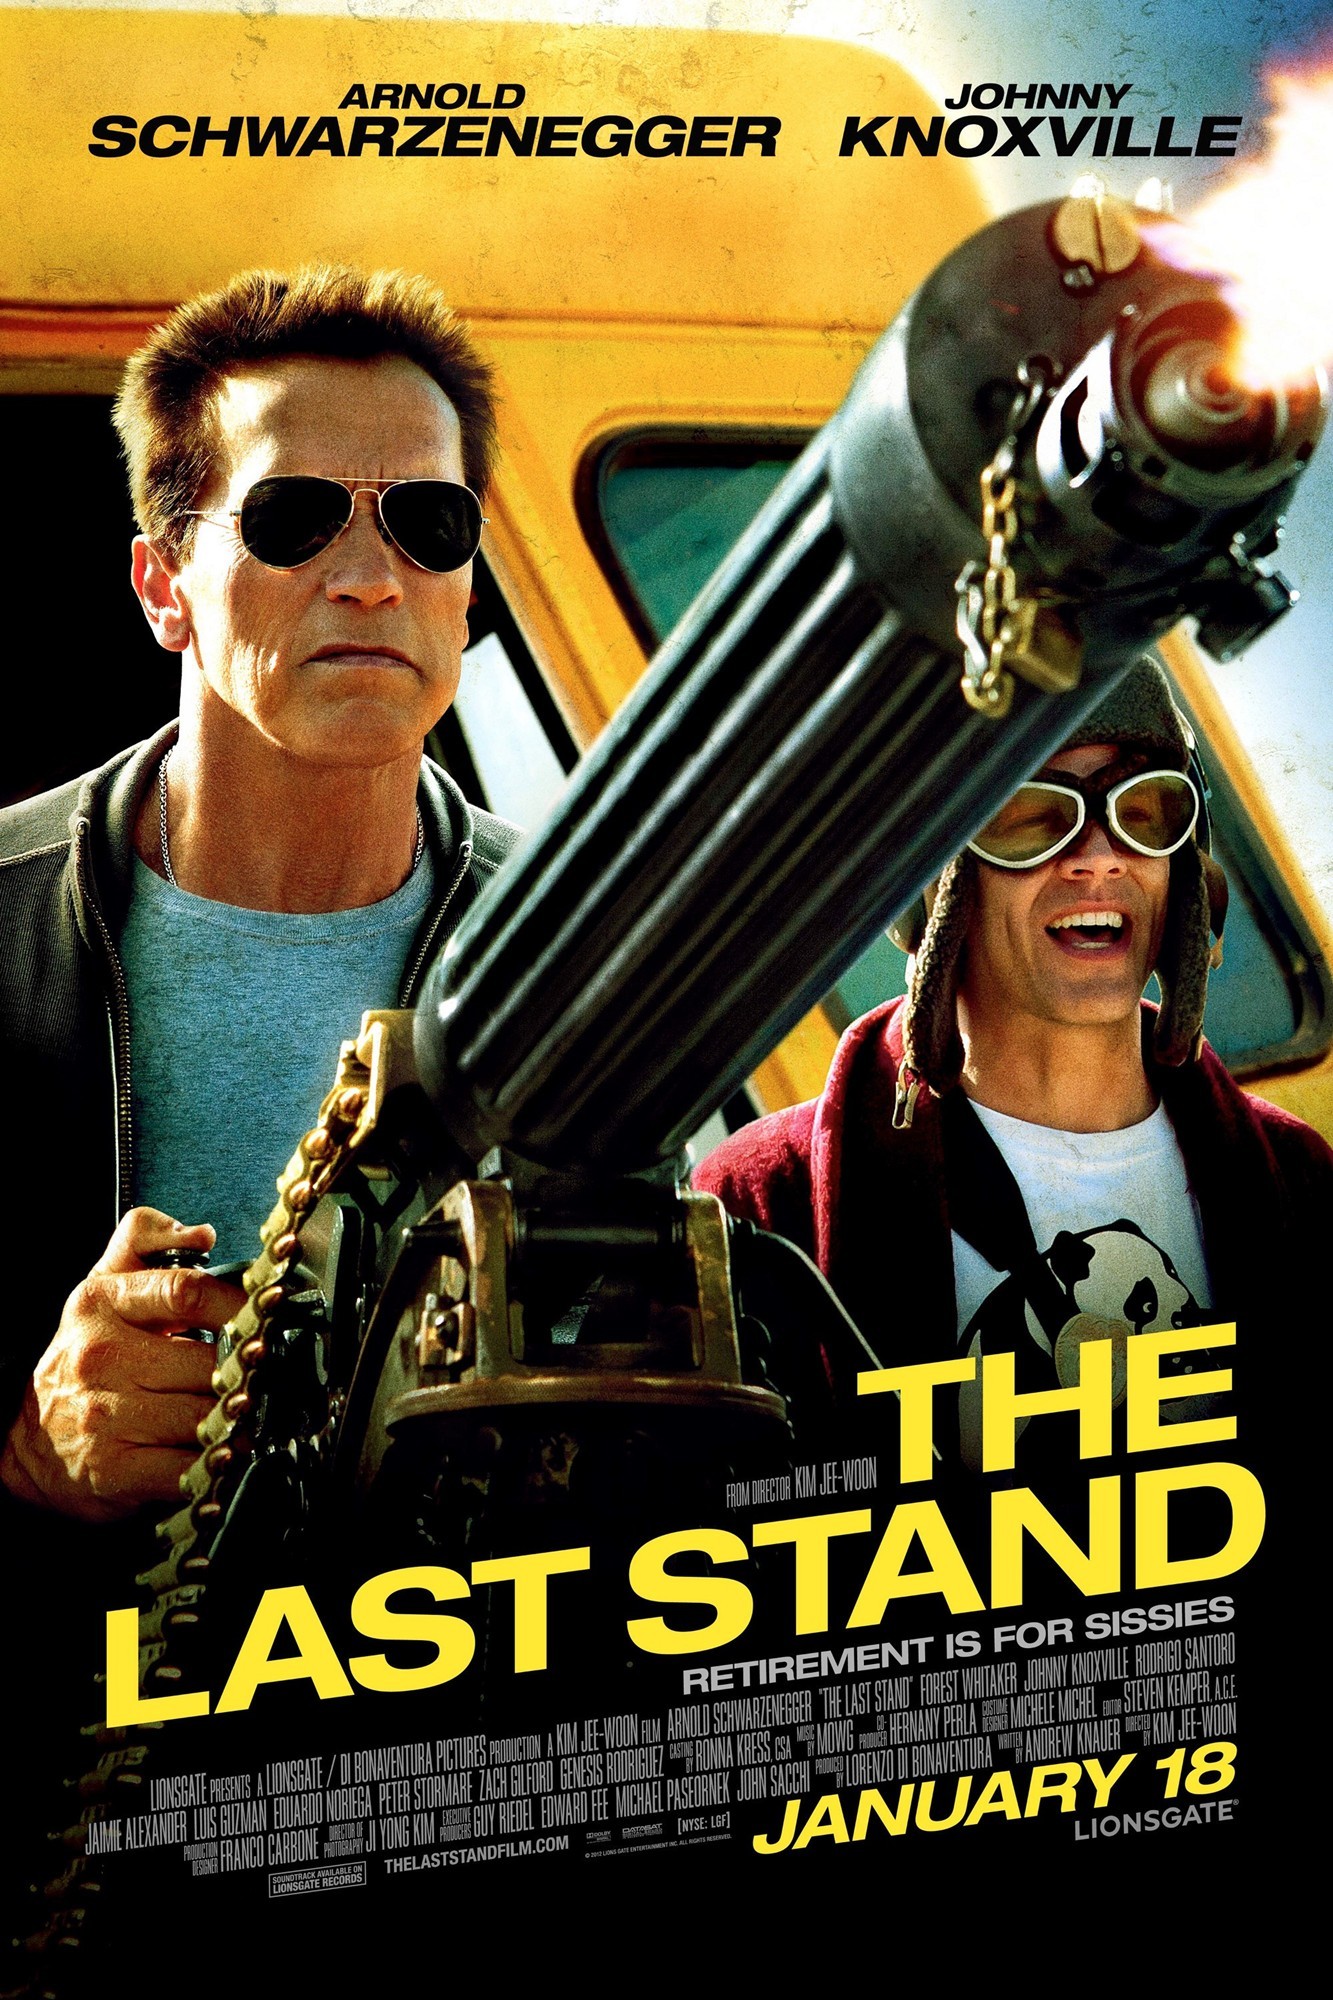 Poster of Lionsgate Films' The Last Stand (2013)